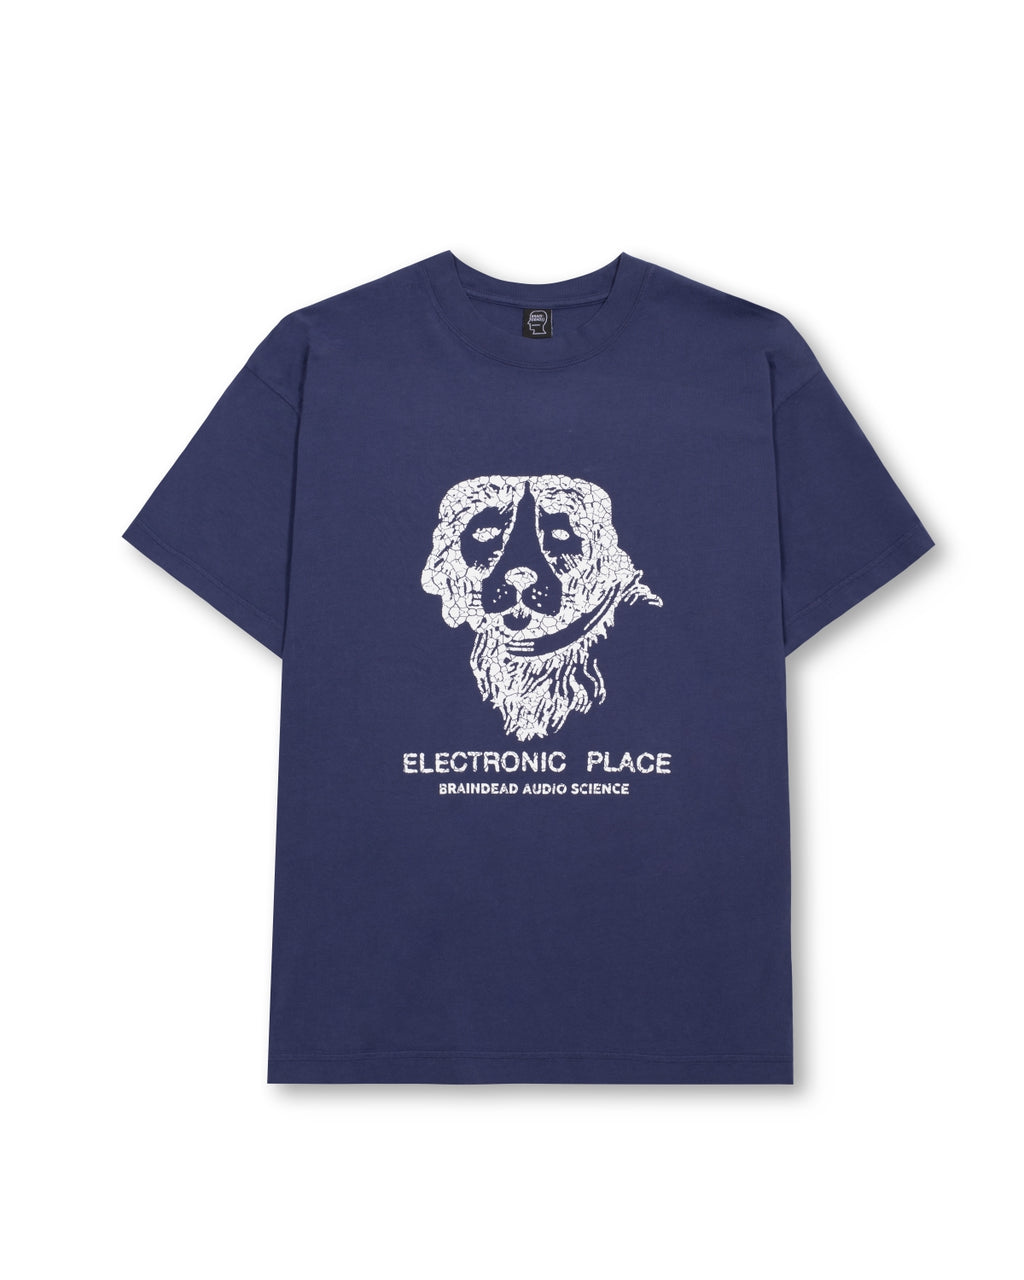 Electronic Place T-shirt	- Navy